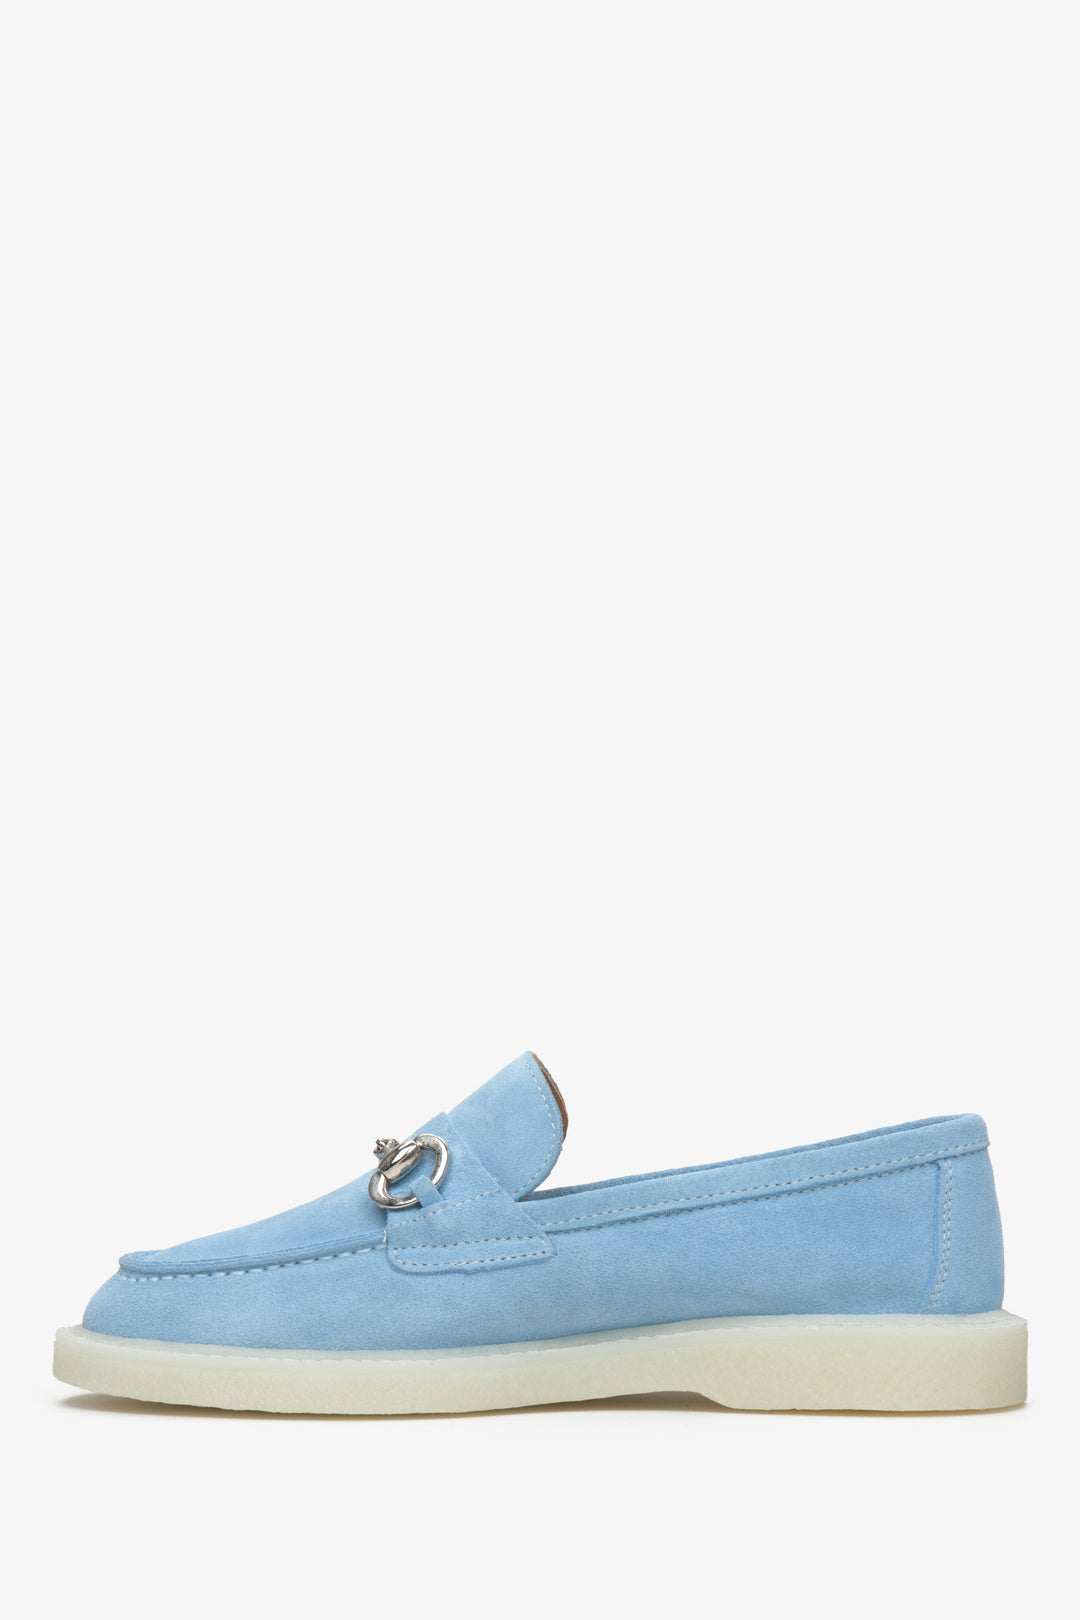 Light blue velour loafers Estro with gold buckle on Italian rubber sole.